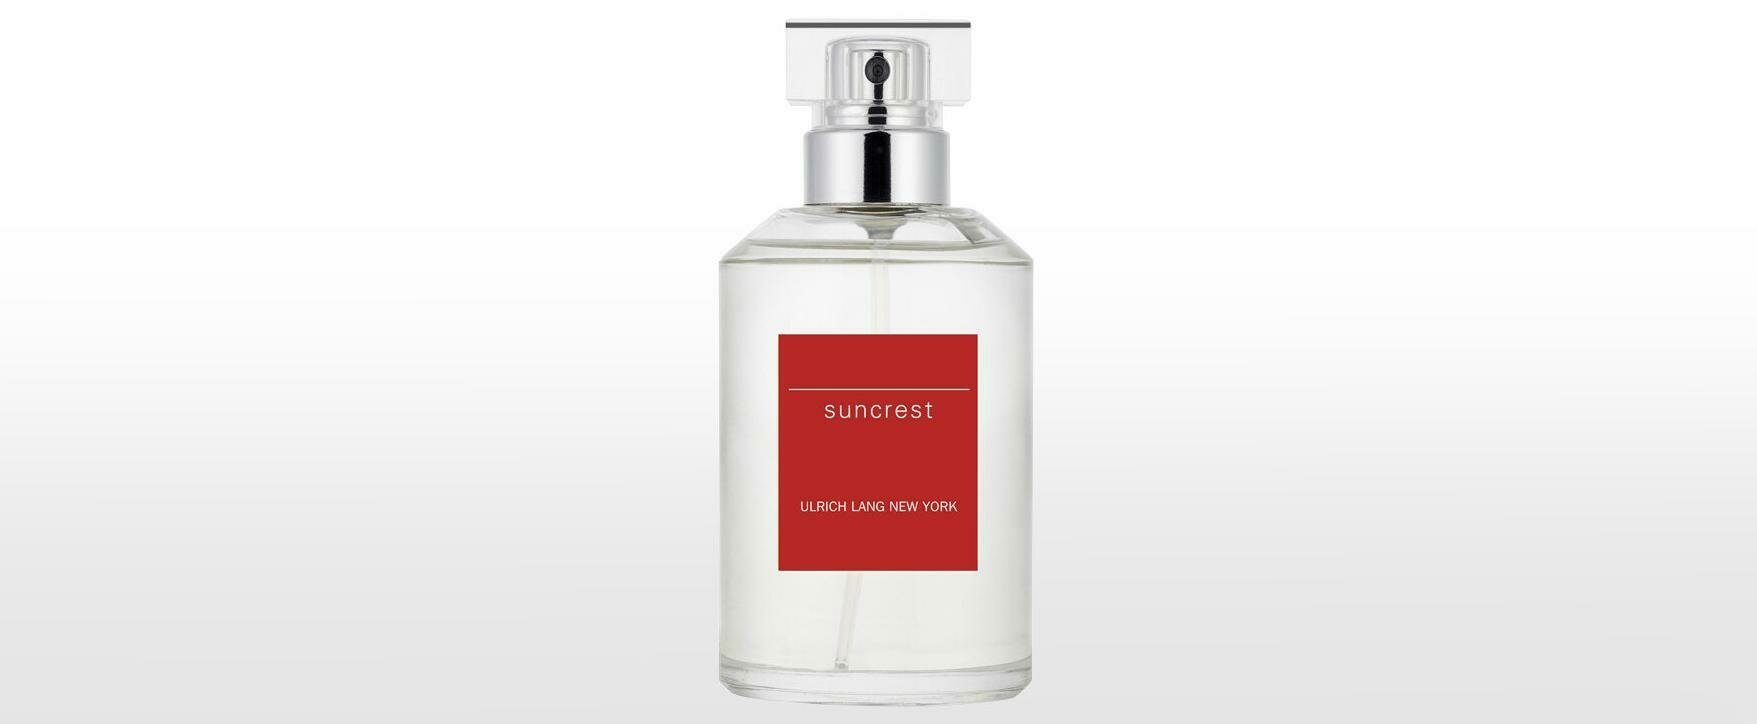 "Suncrest": The Summery Fragrance Novelty by Ulrich Lang 